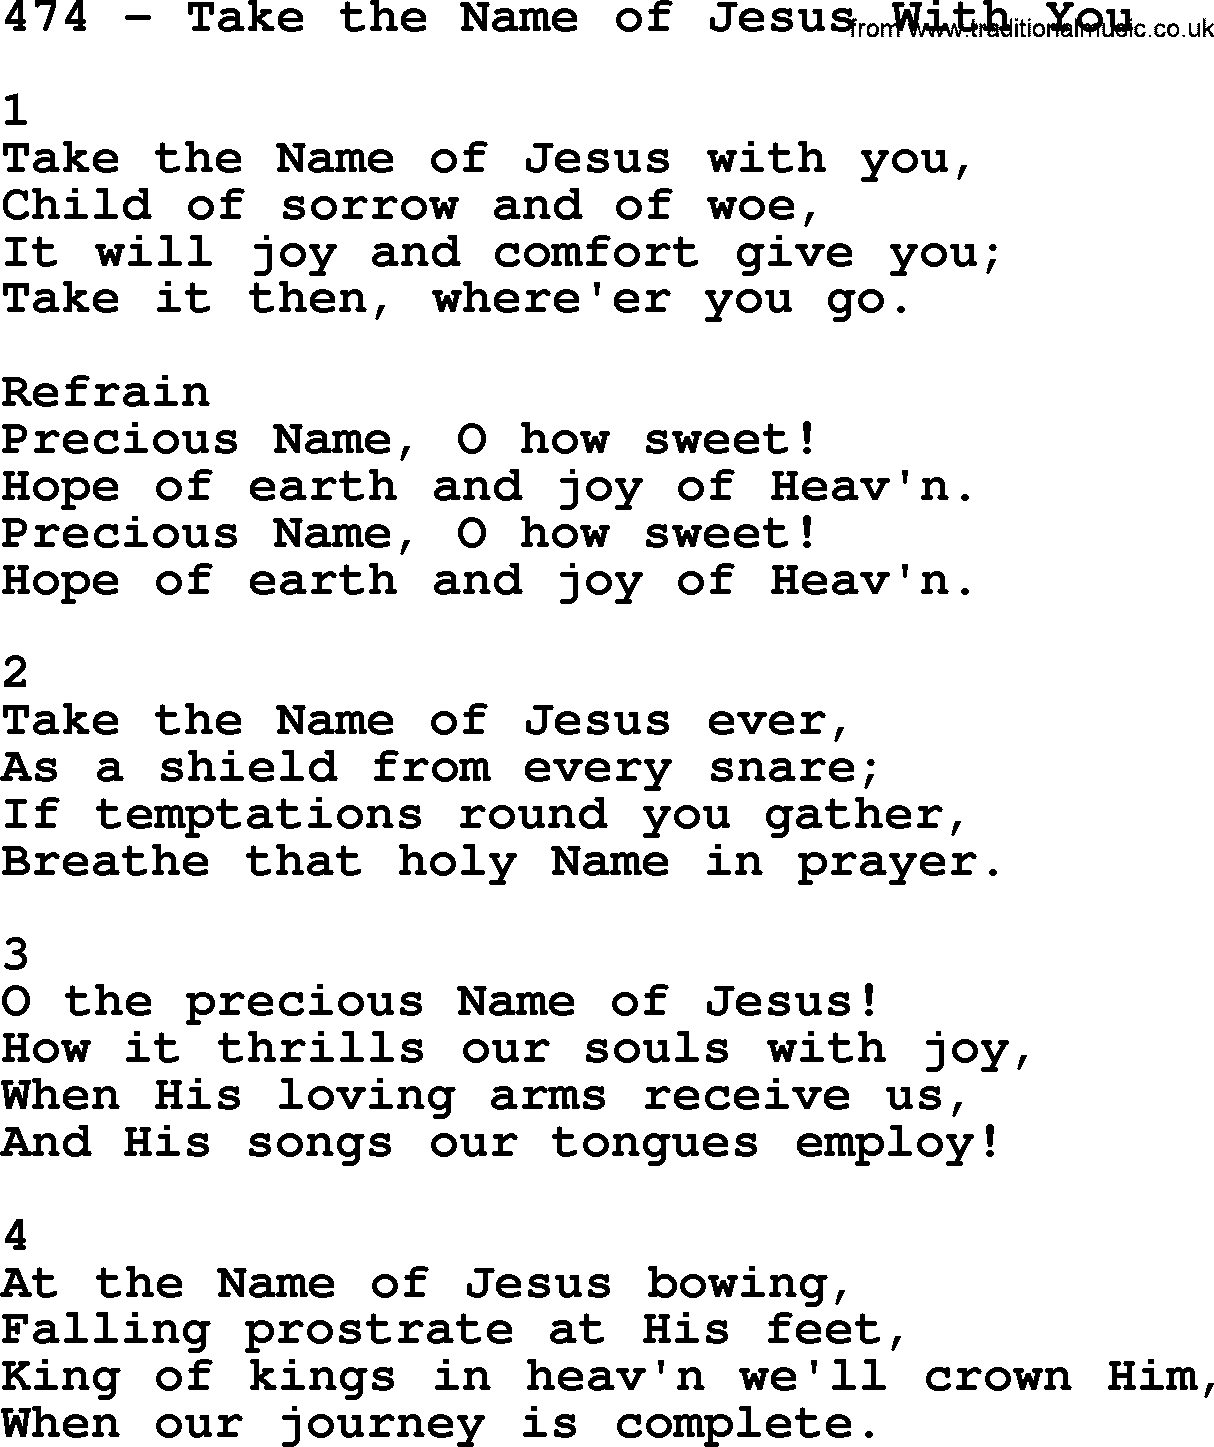 Complete Adventis Hymnal, title: 474-Take The Name Of Jesus With You, with lyrics, midi, mp3, powerpoints(PPT) and PDF,